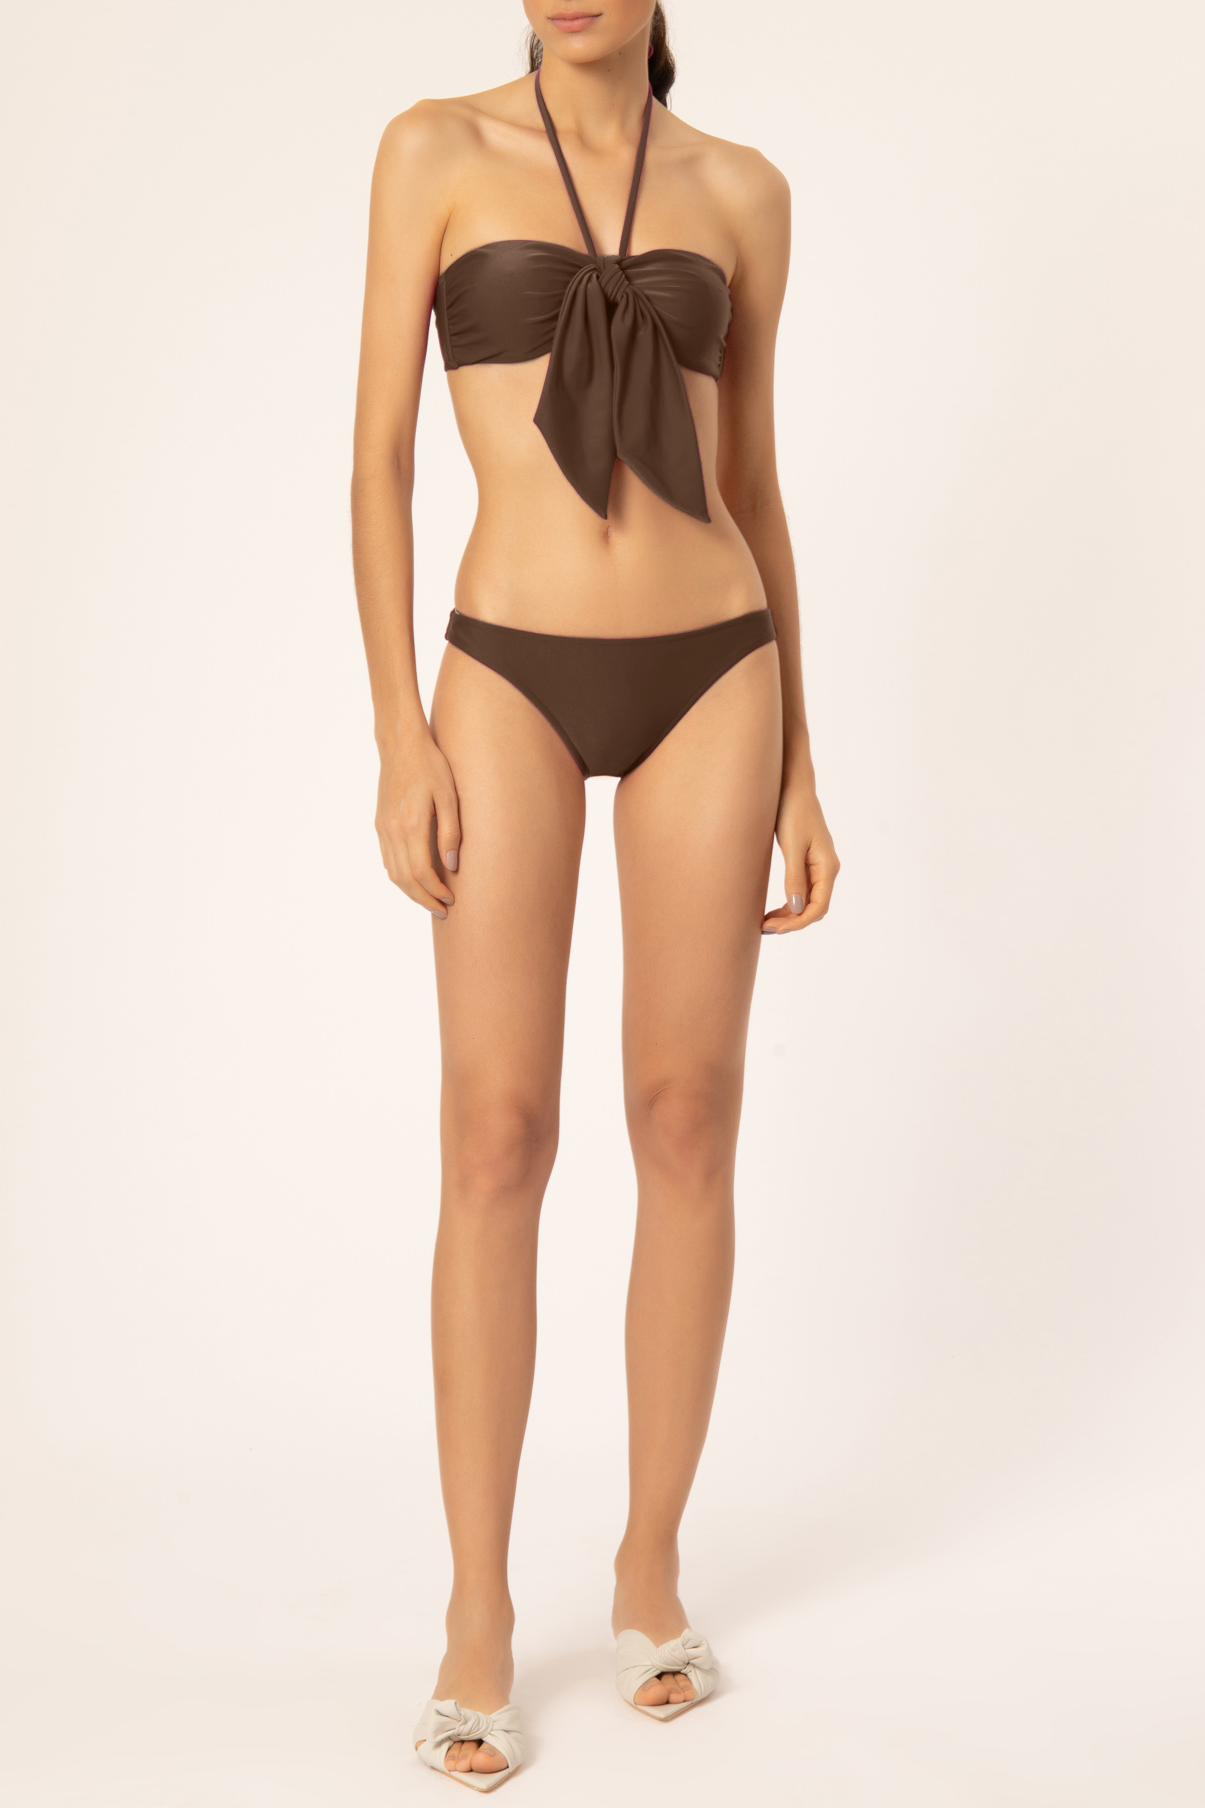 Solid Brown Halterneck Bikini With Knot Front